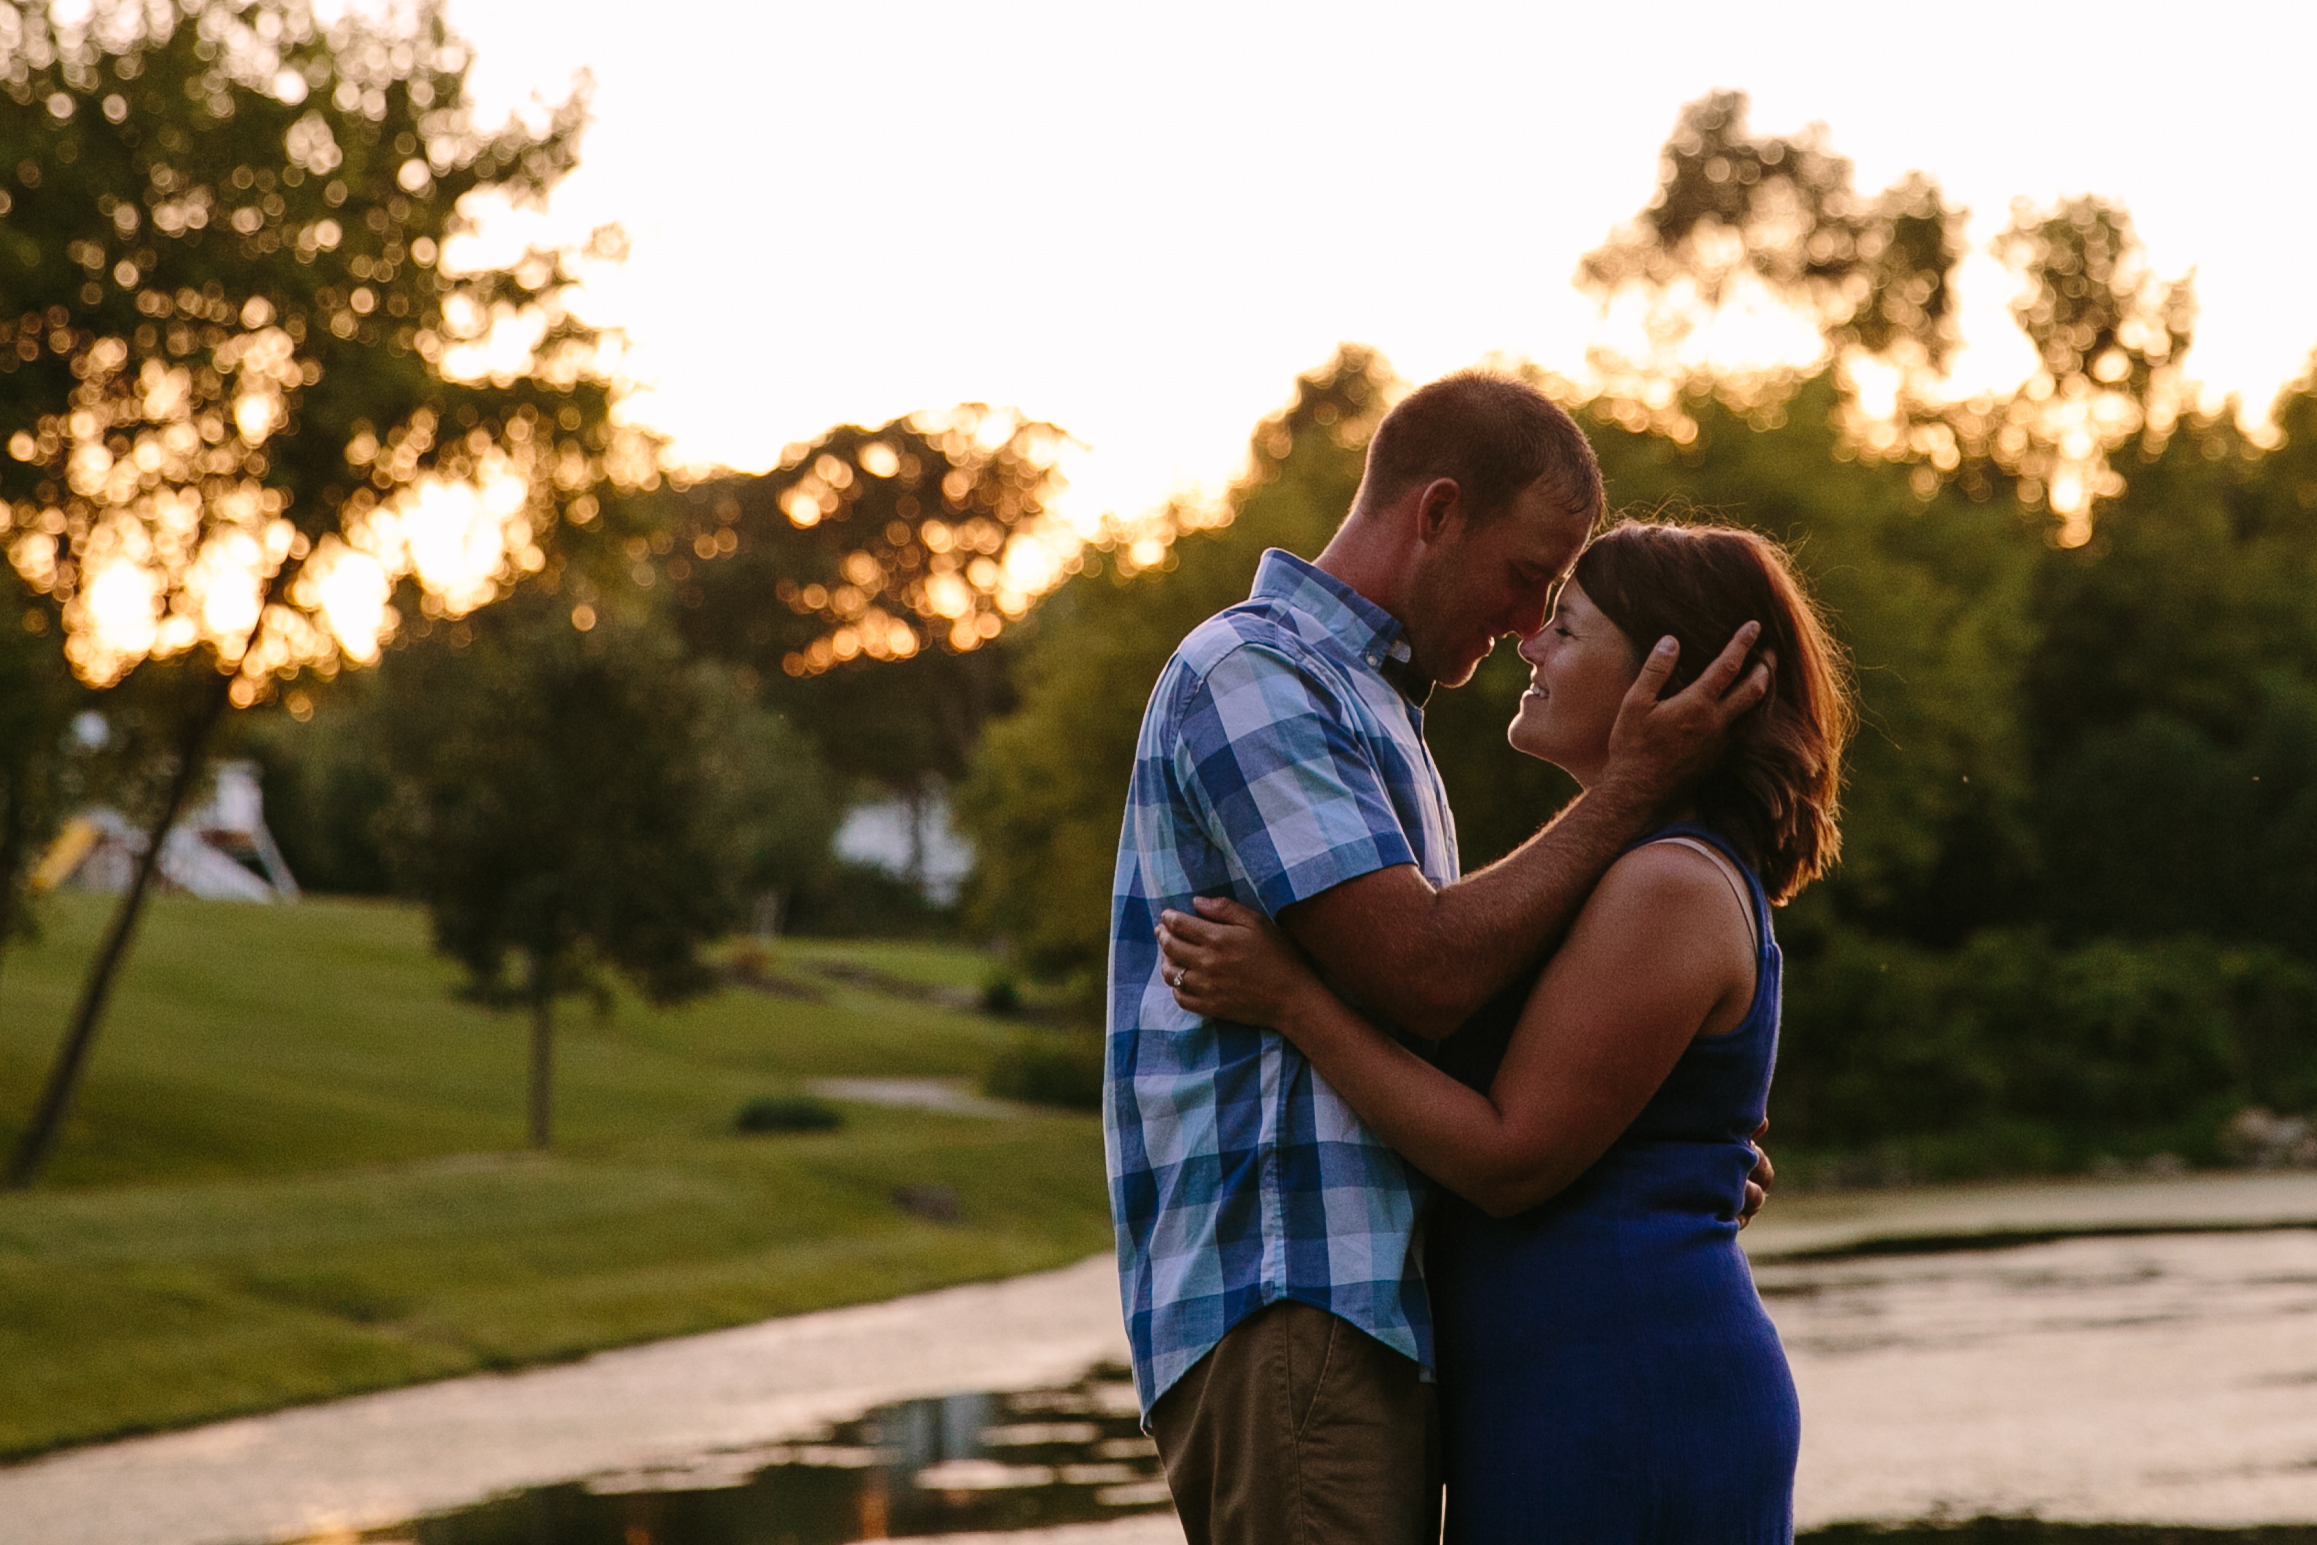 outdoor dubuque engagement session by catherine furlin photography, couple snuggling by asbury lake